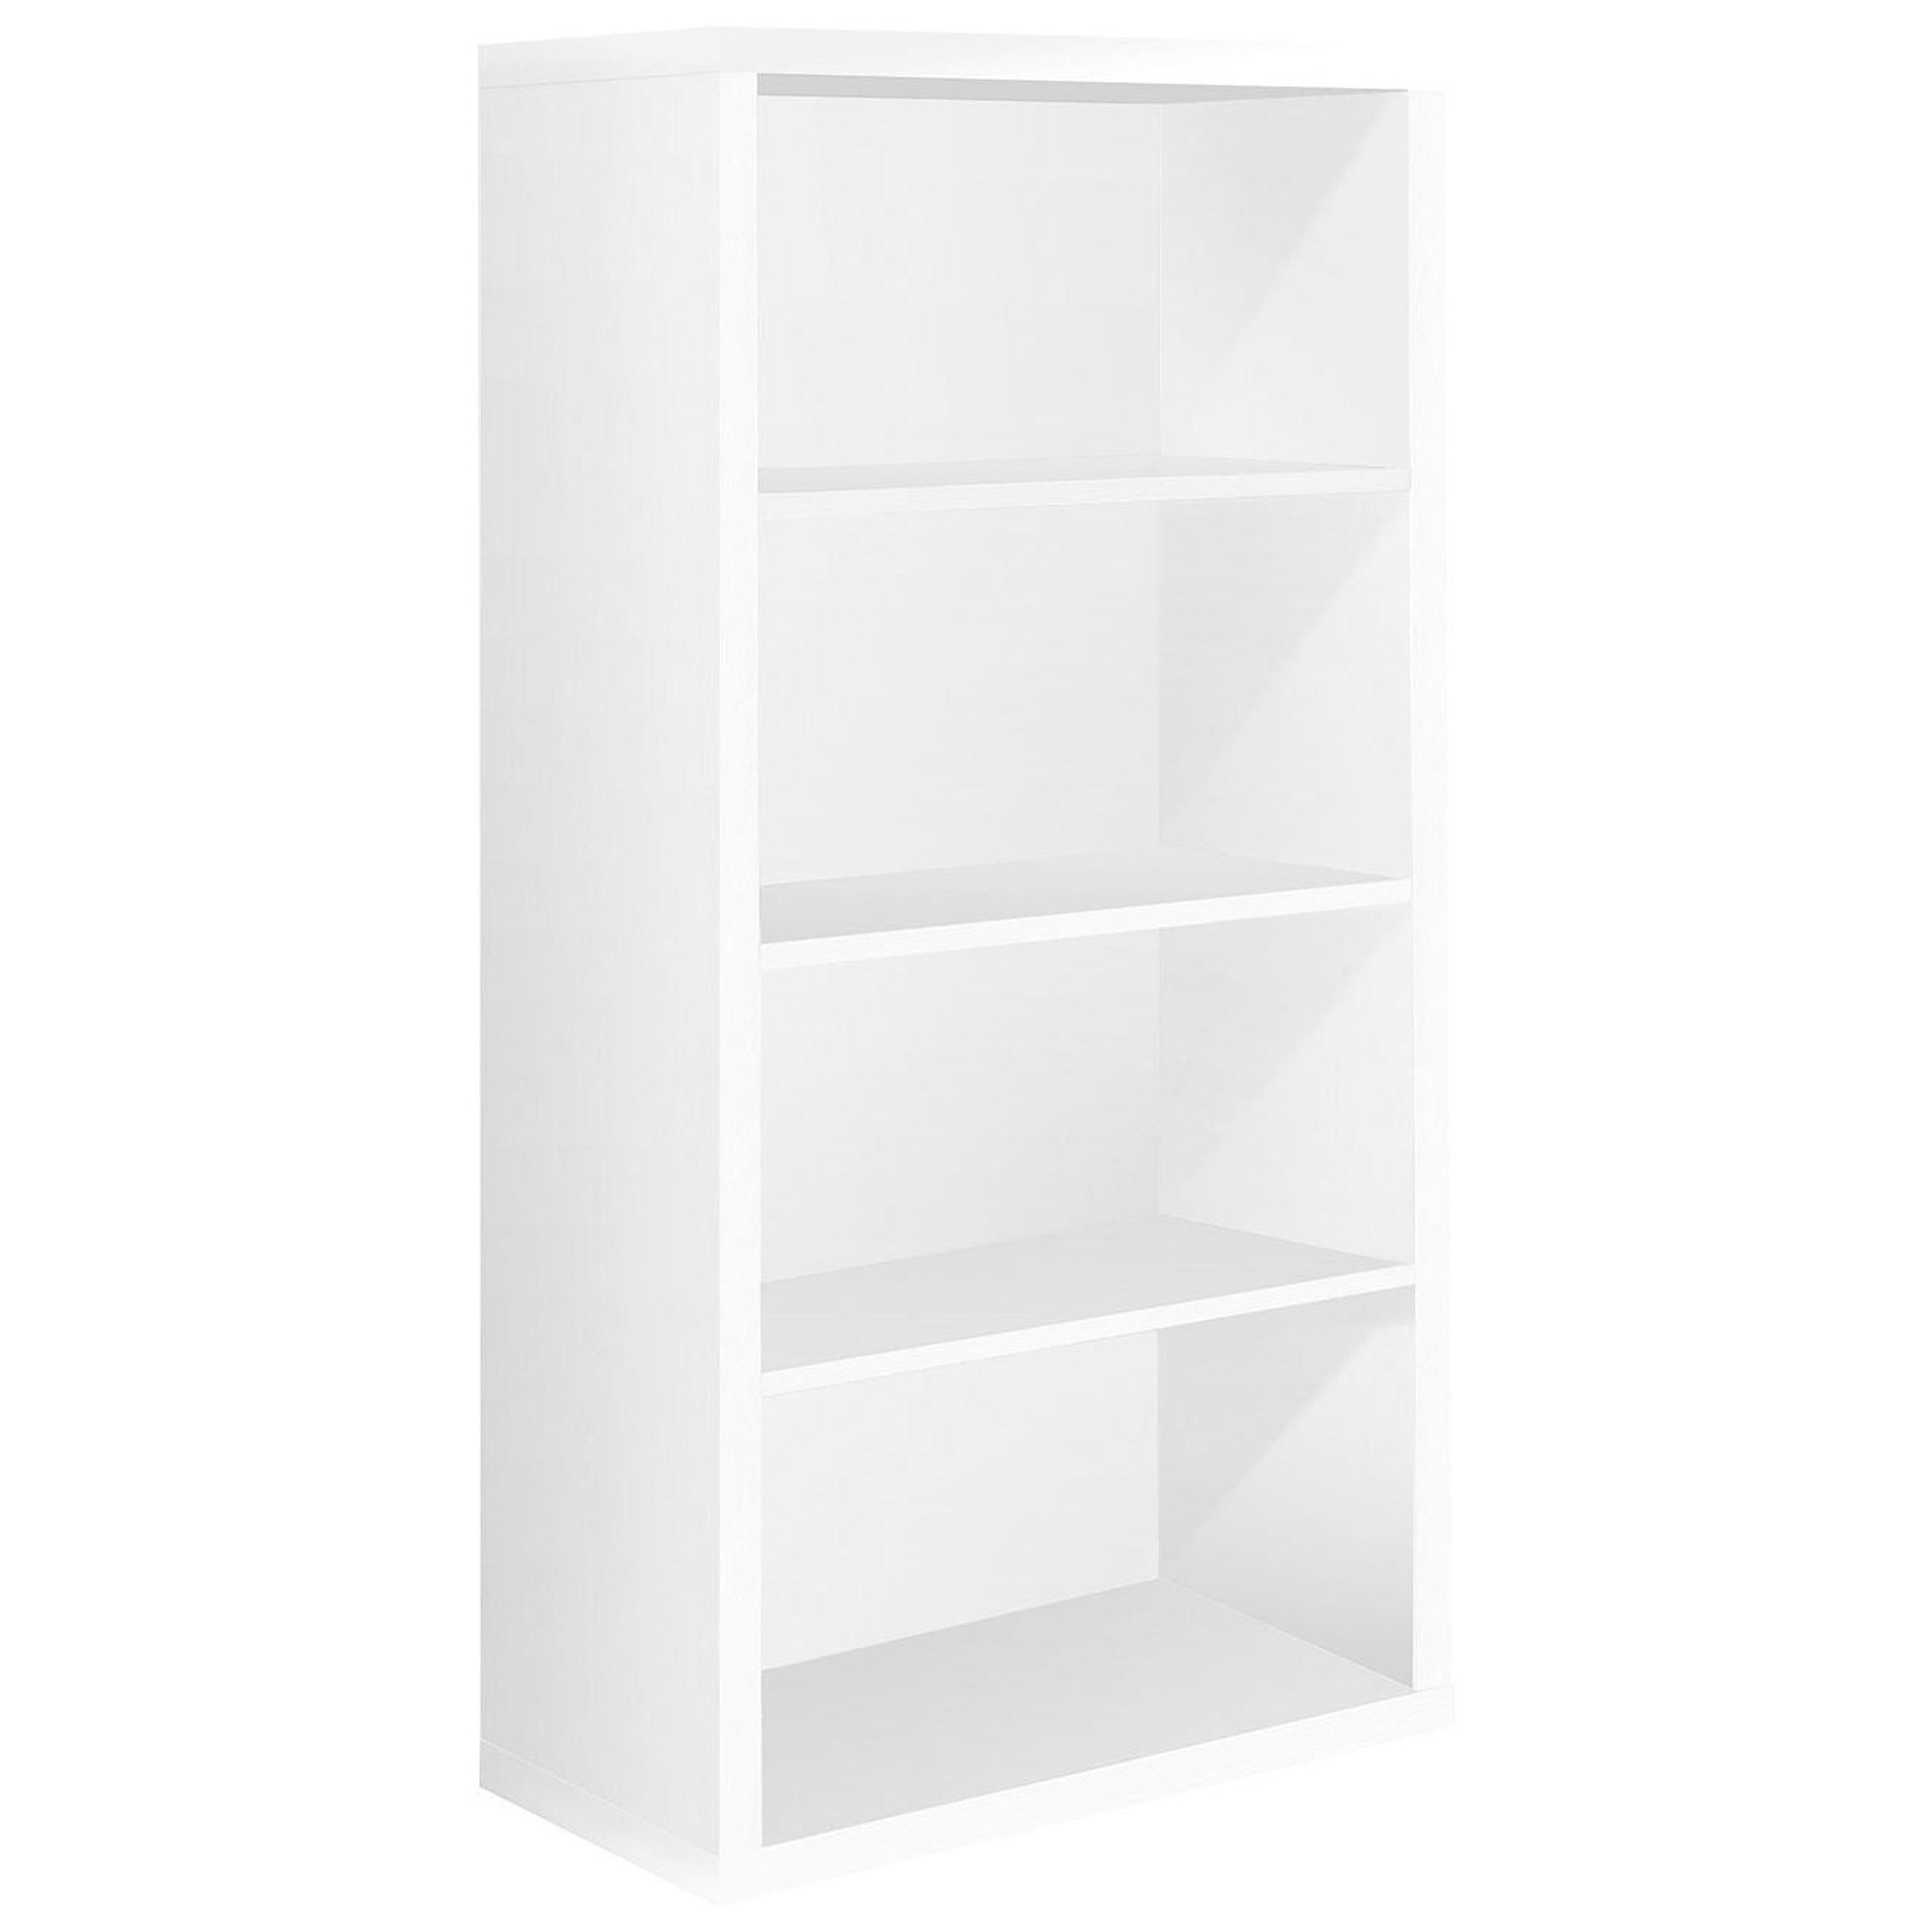 4 Tiers Rectangular White Bookshelf | with Drawer | Wood | for Style at Home | Costway | 48 inch Tall